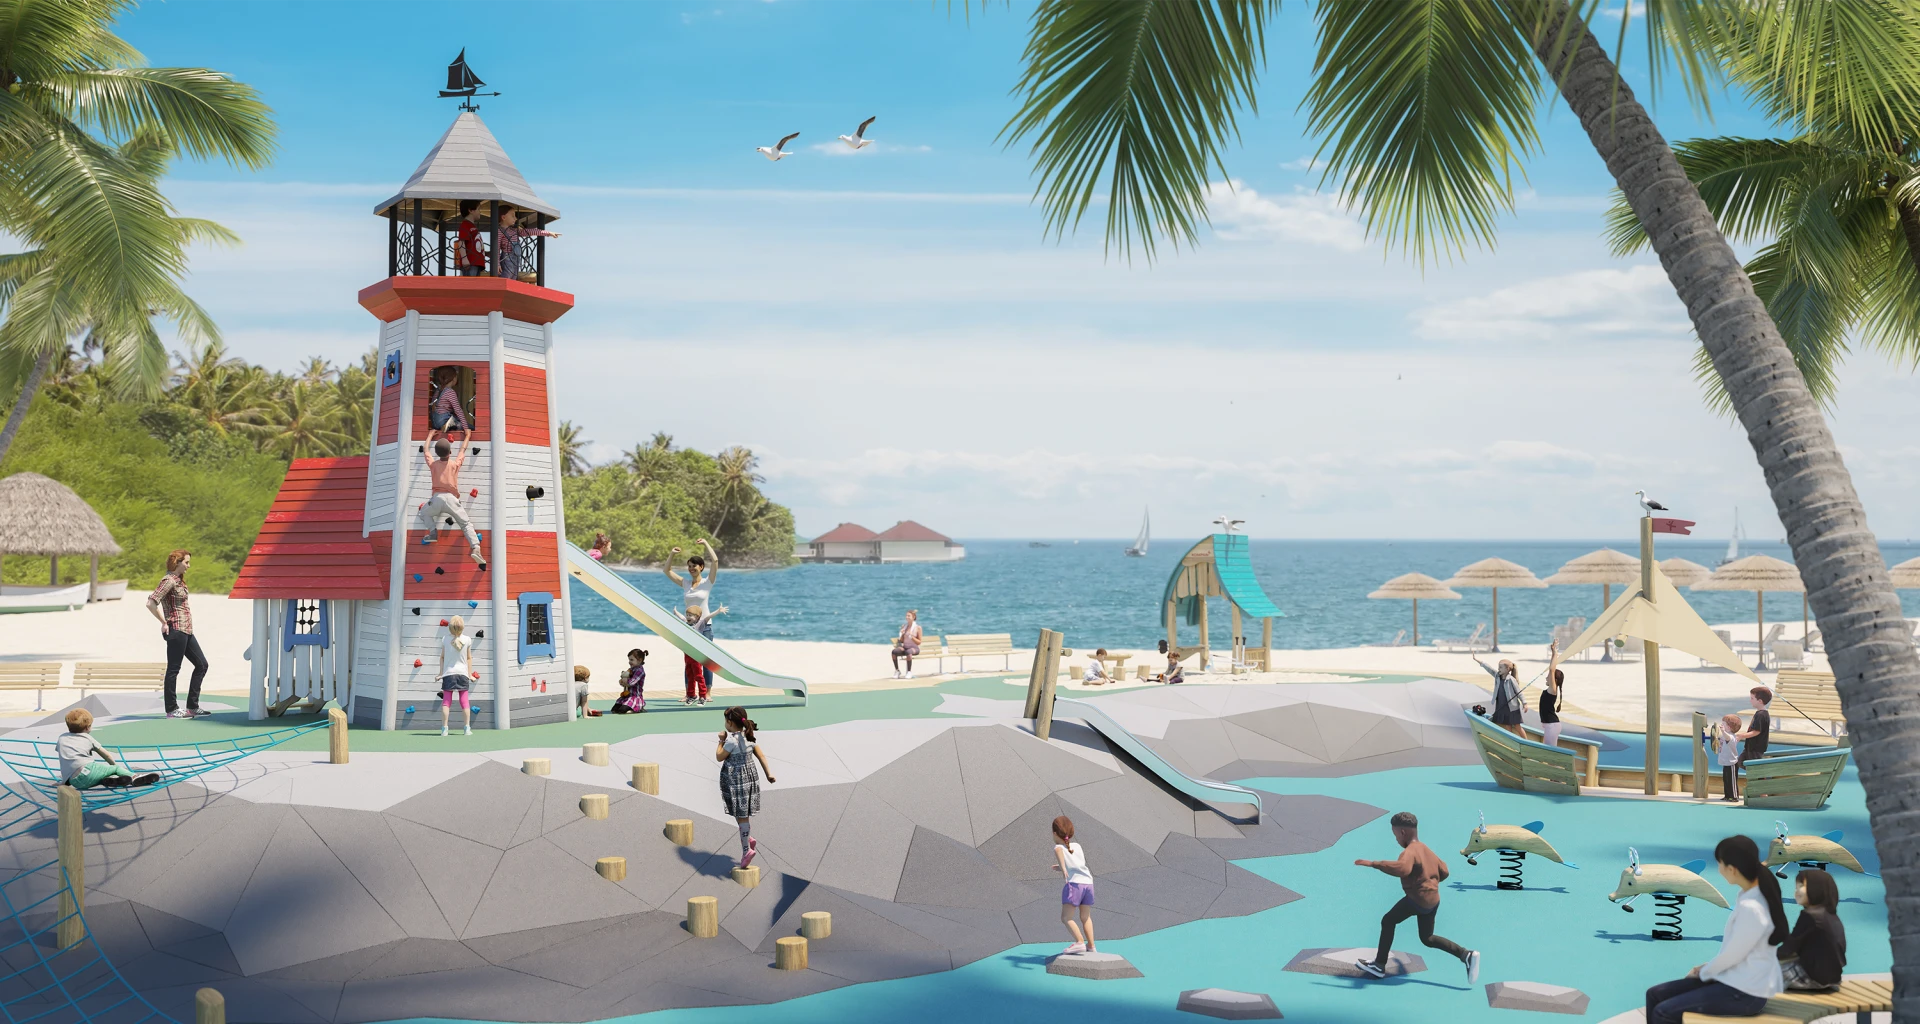 Design rendering of a lighthouse play structure